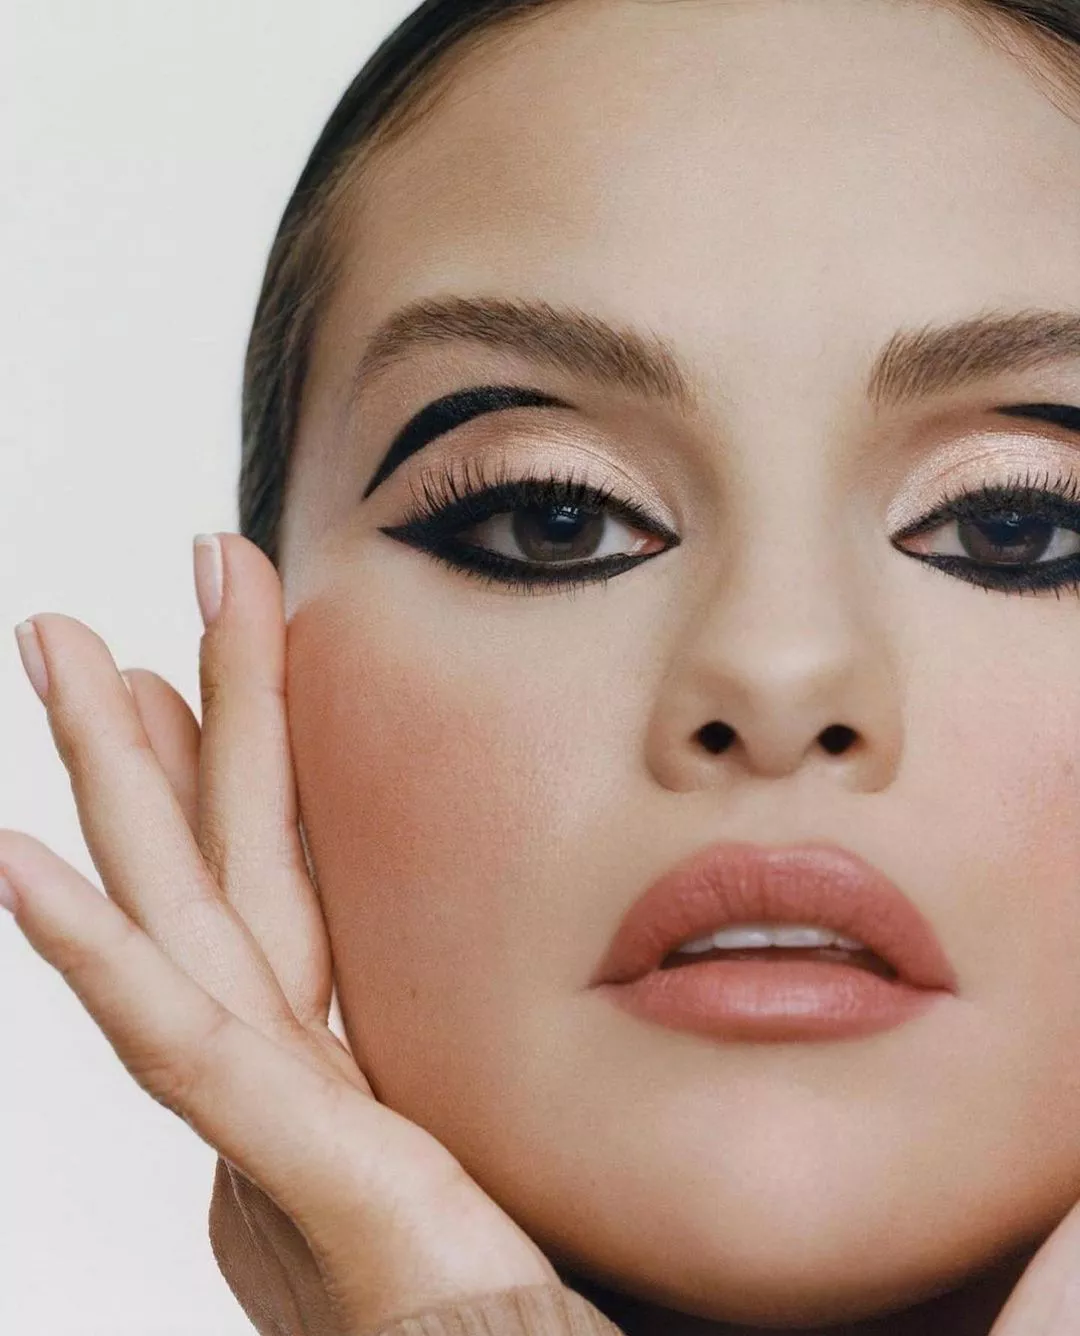 Selena Gomez Just Tried Out the Naked Nail Trend With a Barely-There Manicure